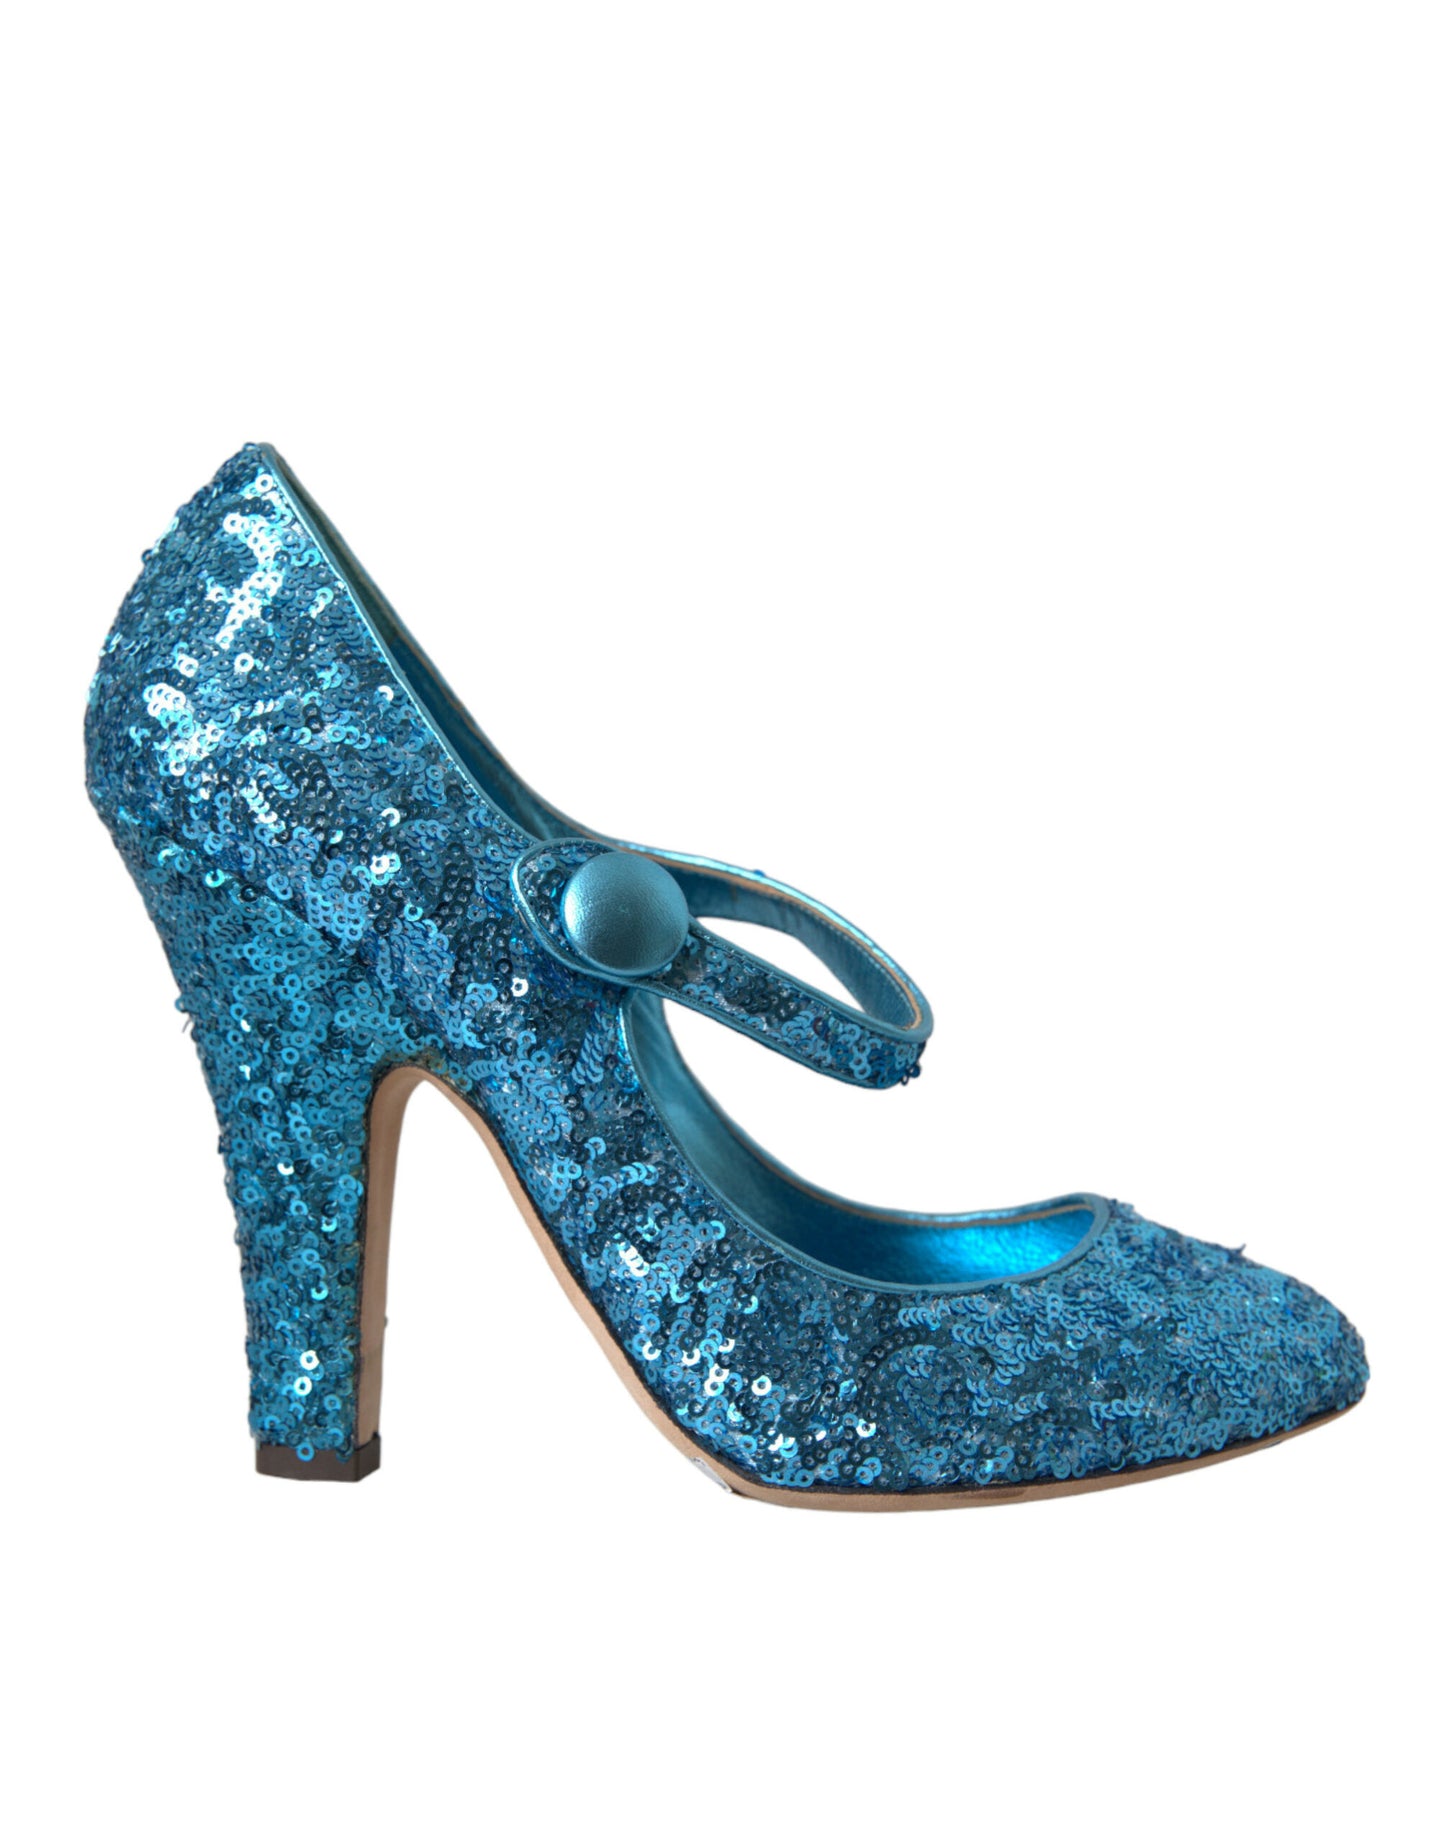 Dolce & Gabbana Blue Sequin Mary Jane Pumps High Heels Shoes